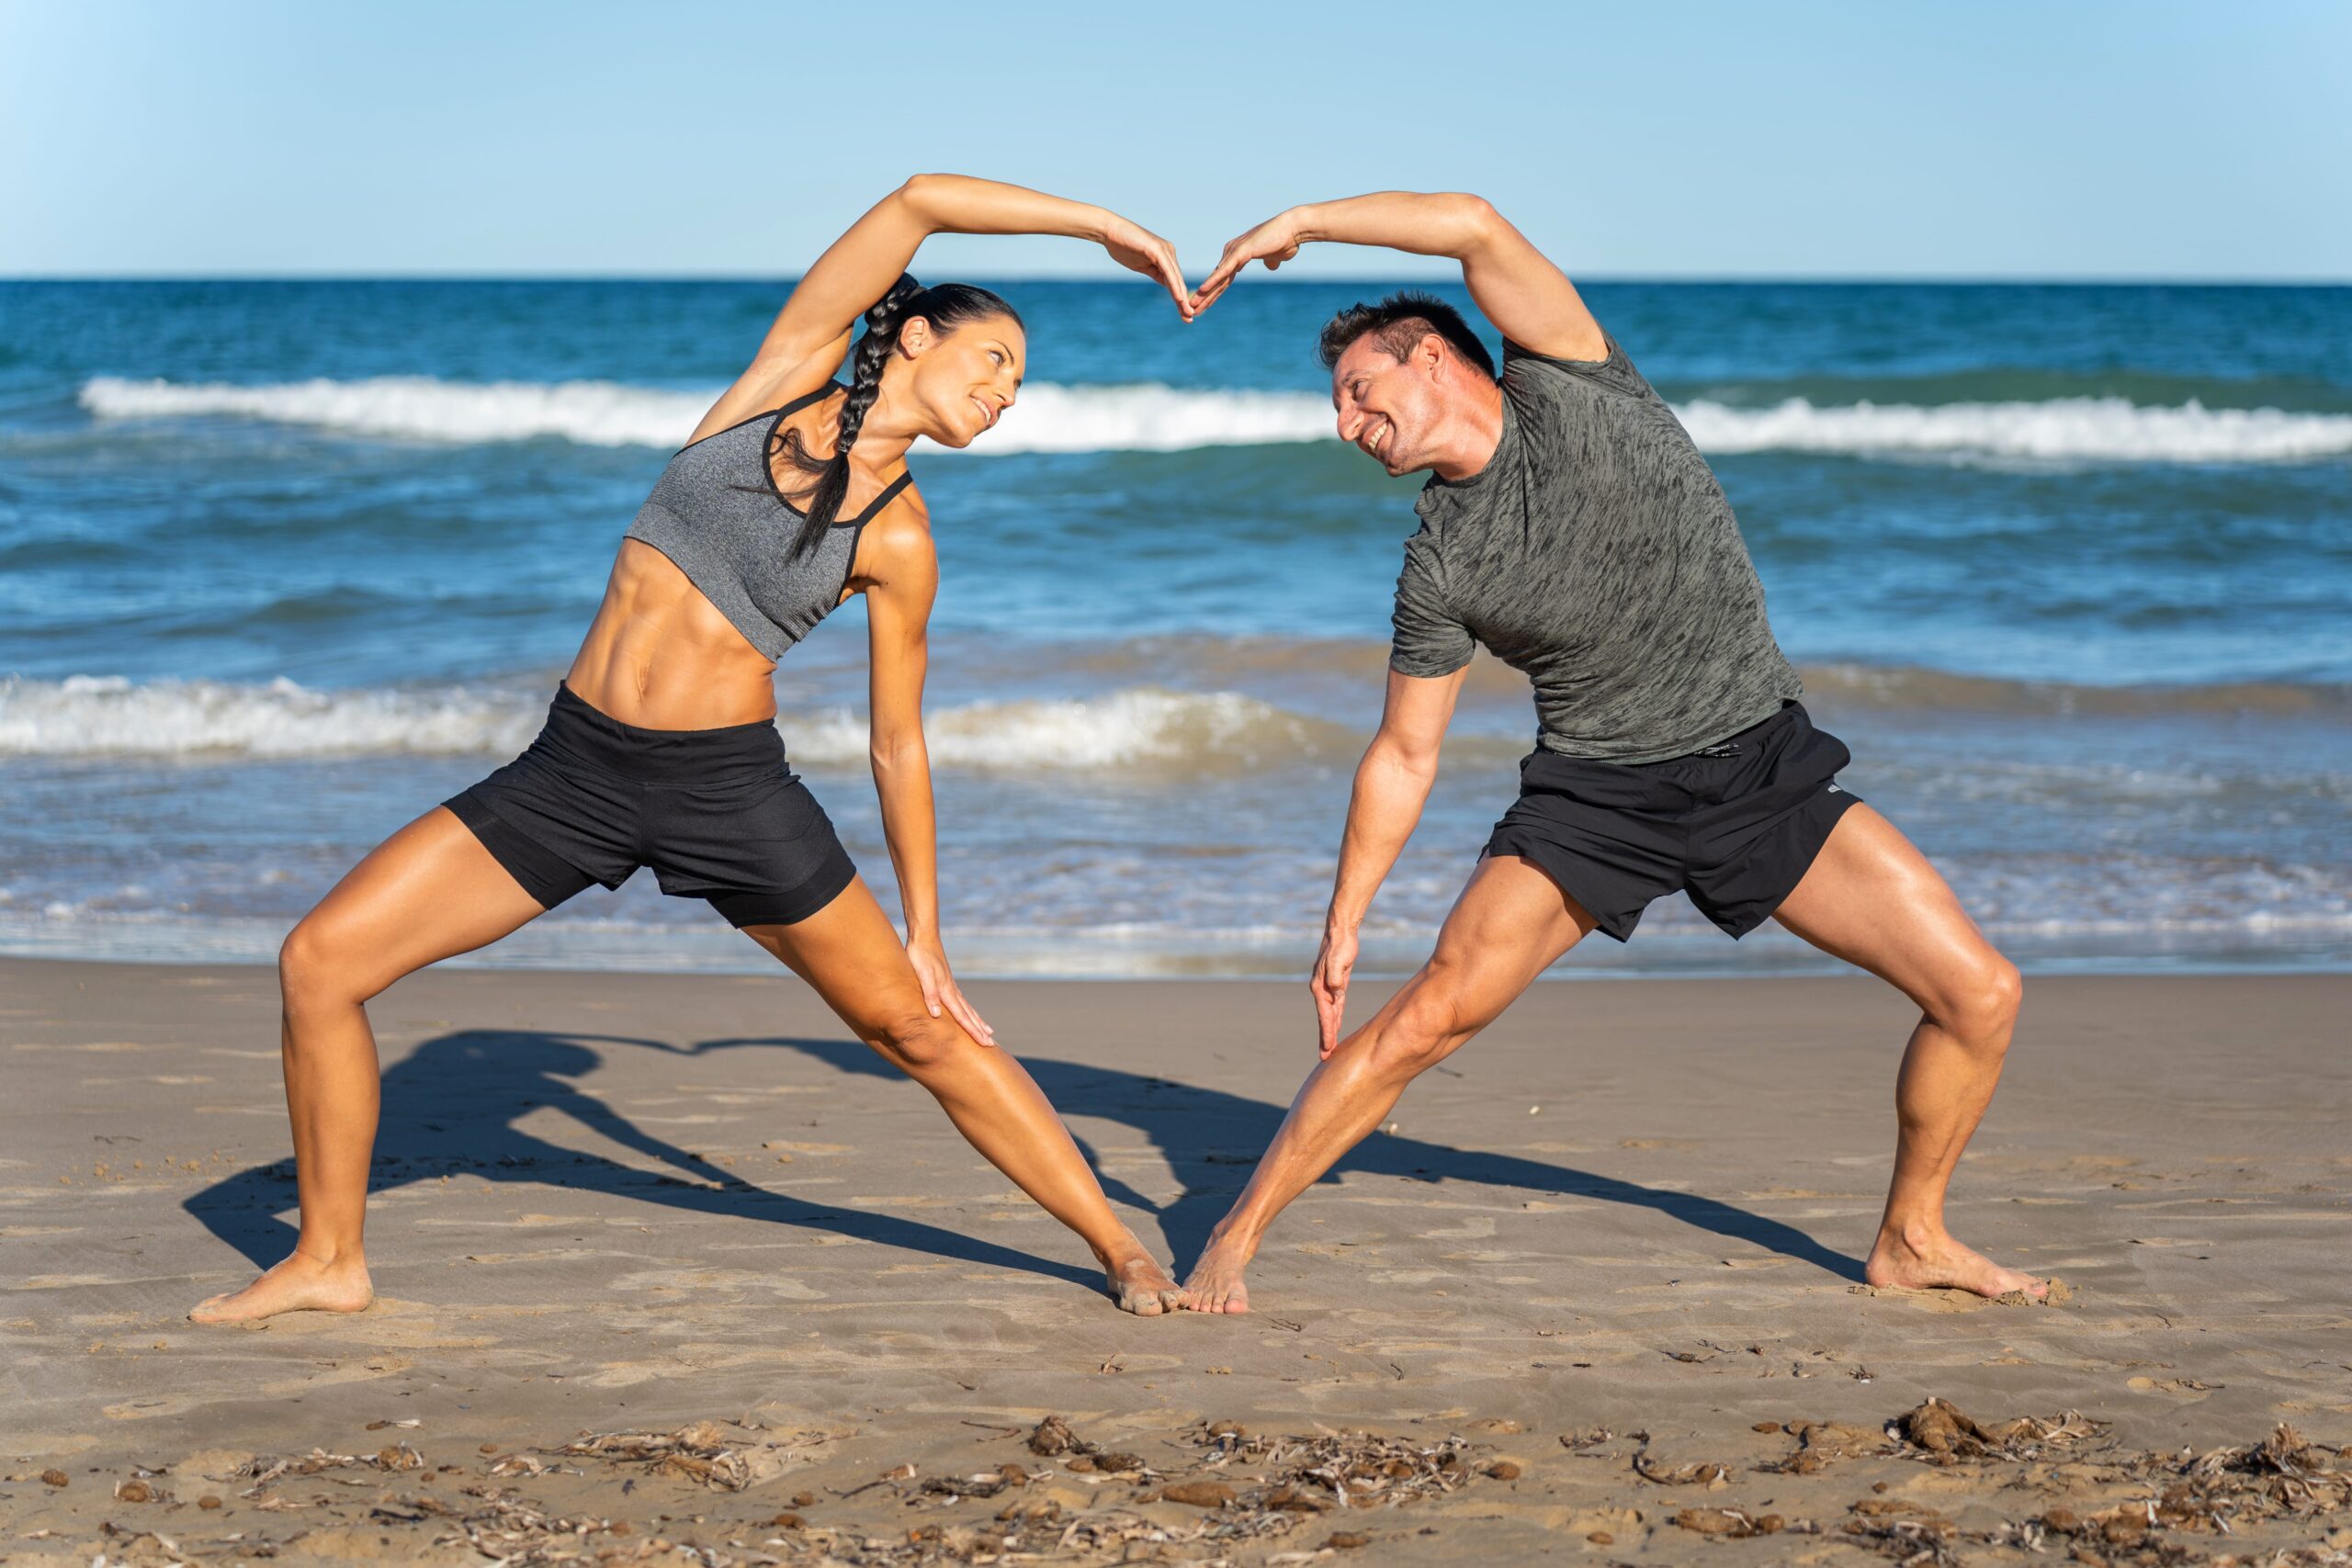 Correct Exercise can improve your heart health